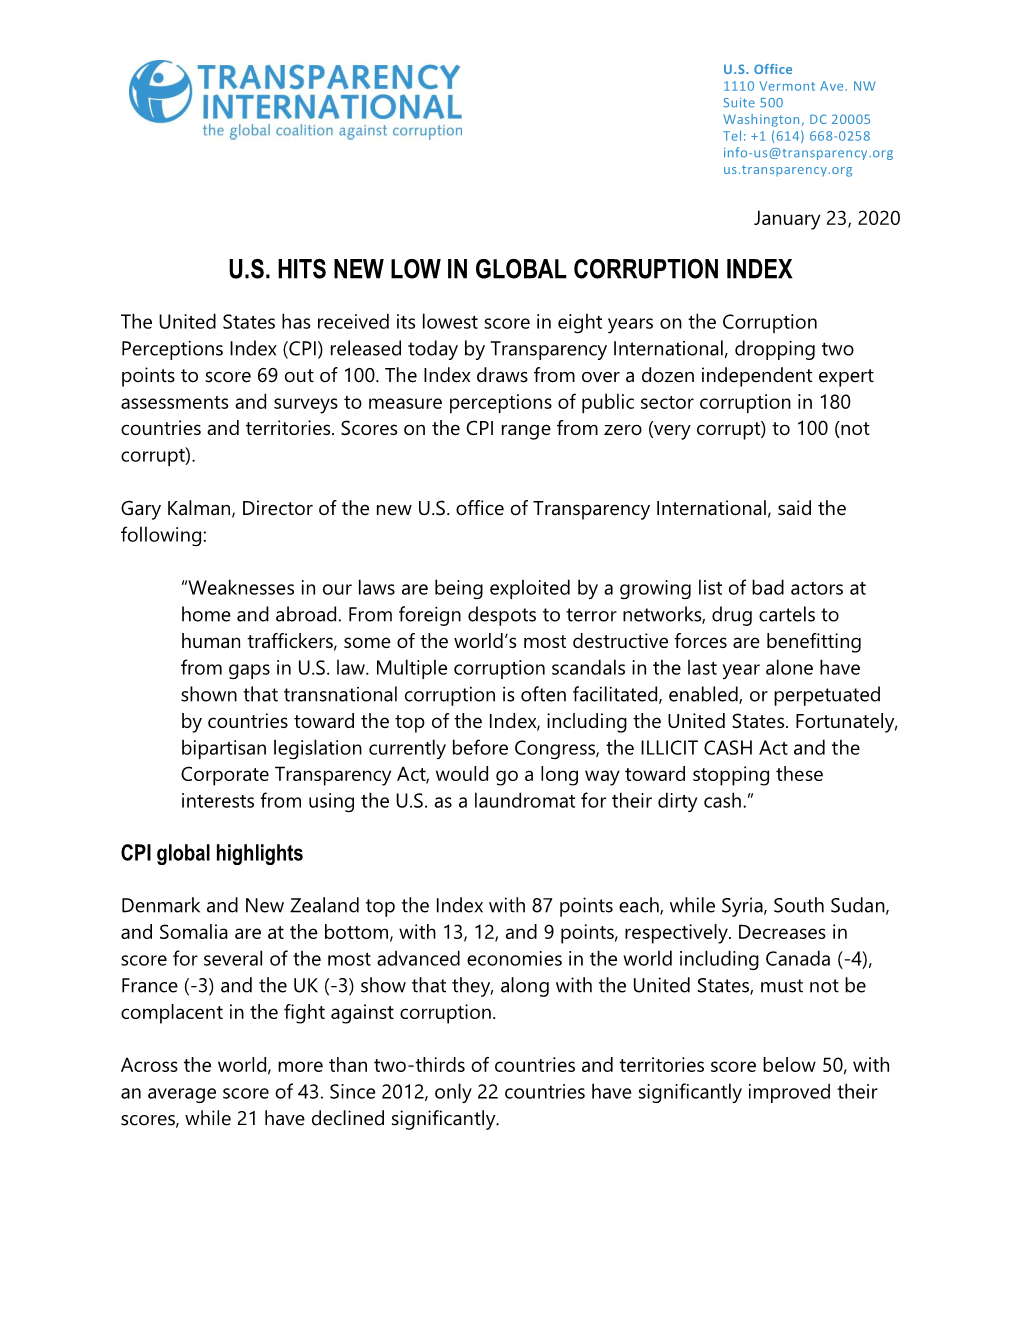 U.S. Hits New Low in Global Corruption Index